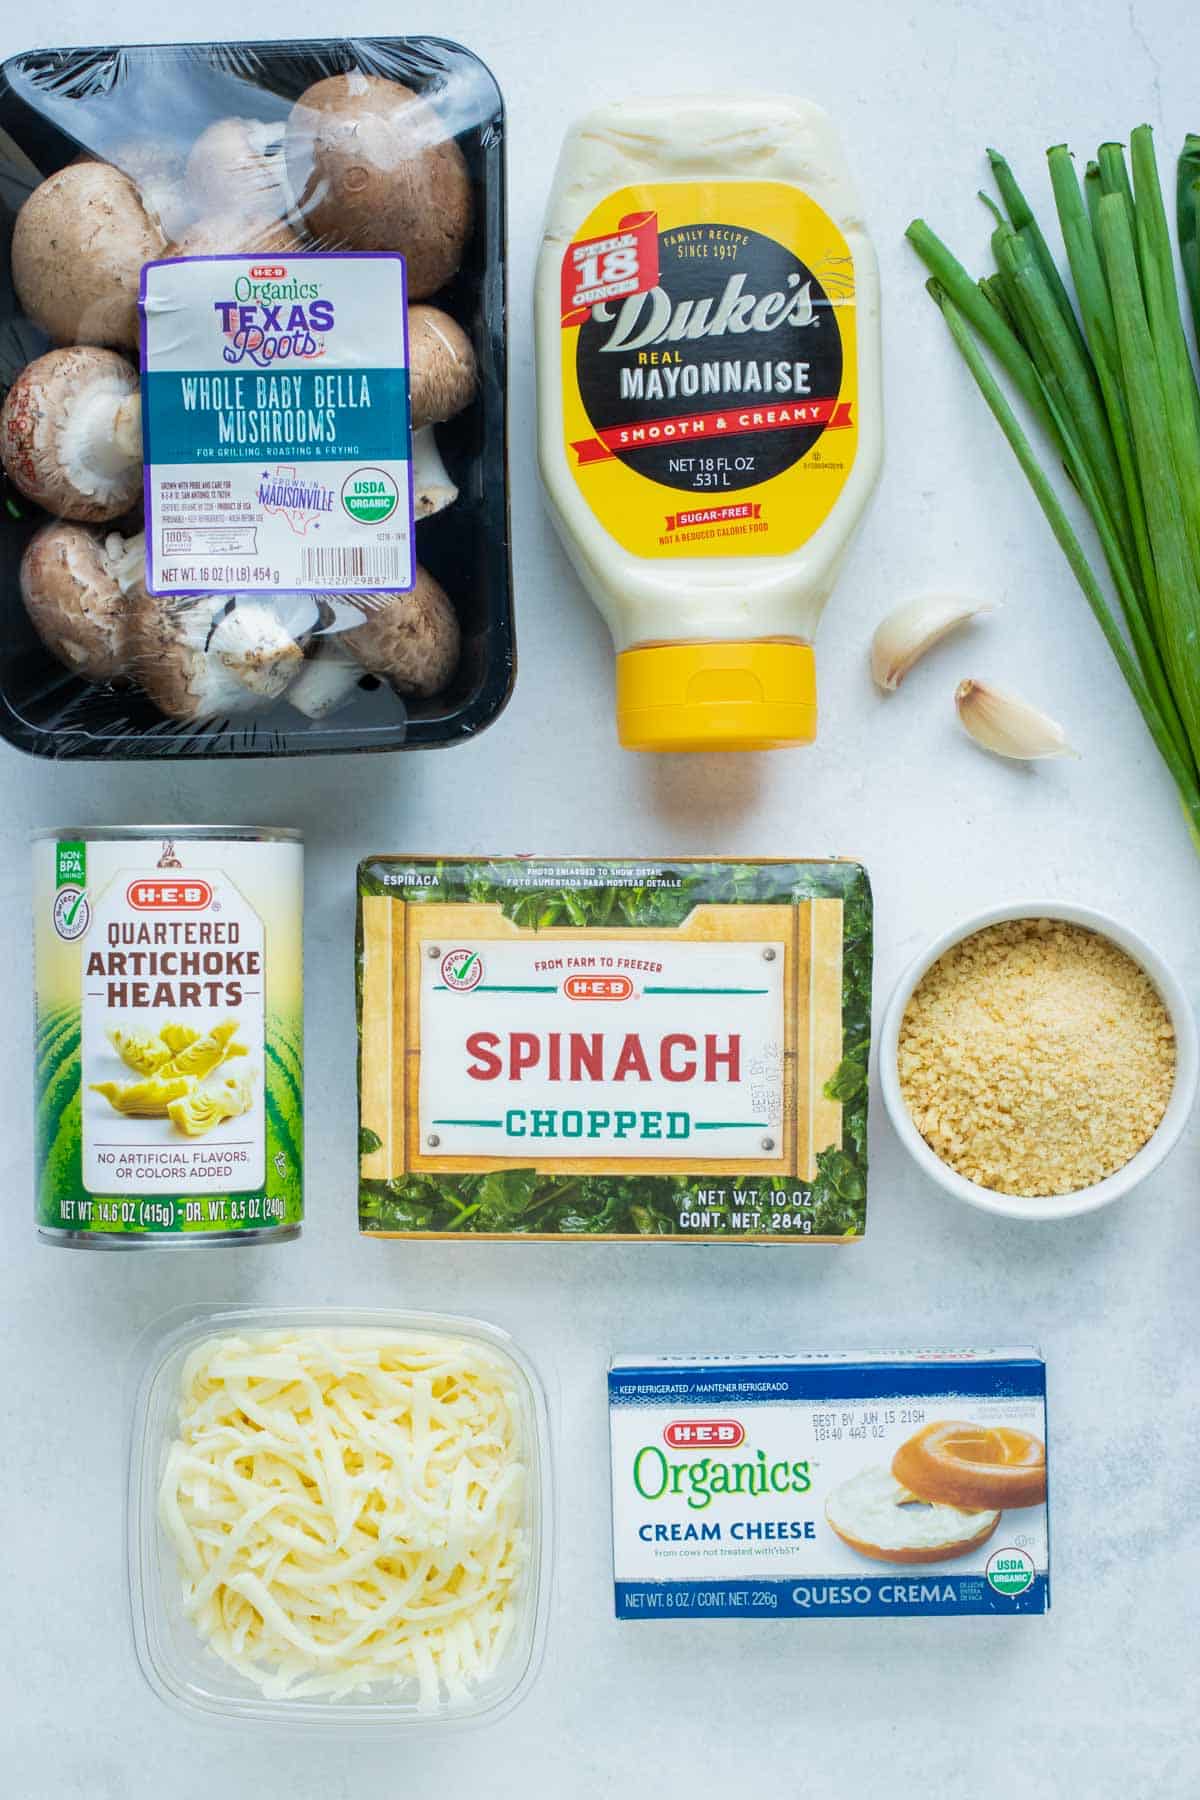 Frozen spinach, mushrooms, mayo, cream cheese, mozzarella and parmesan cheese, spices, breadcrumbs, green onions, and canned artichokes are the ingredients for this recipe.